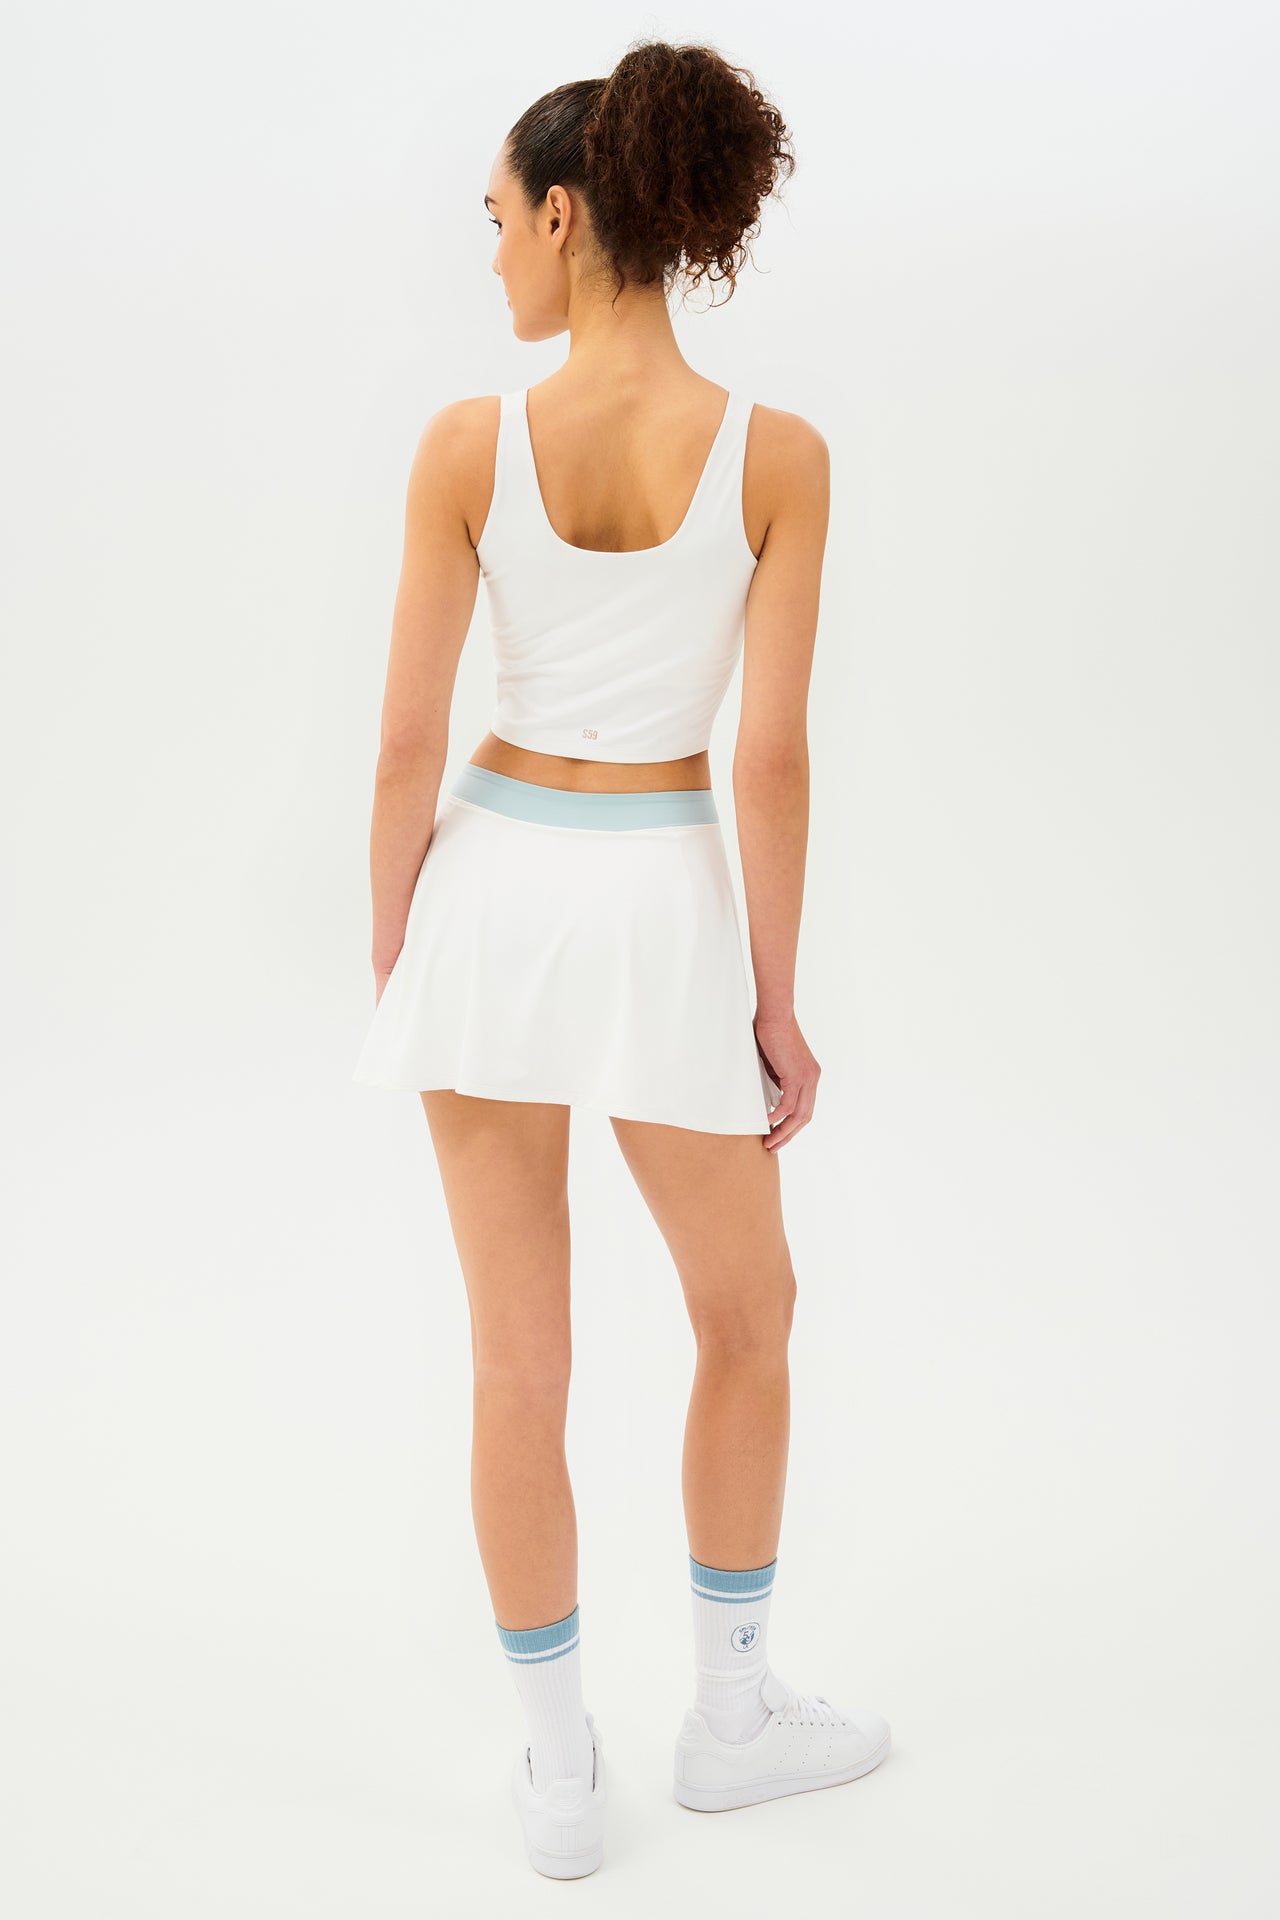 Front back view of woman with dark curly hair in a ponytail wearing a cropped white tank bra with white skort with teal details on the waistband and logo. Model is wearing white socks with teal stripe and all white shoes